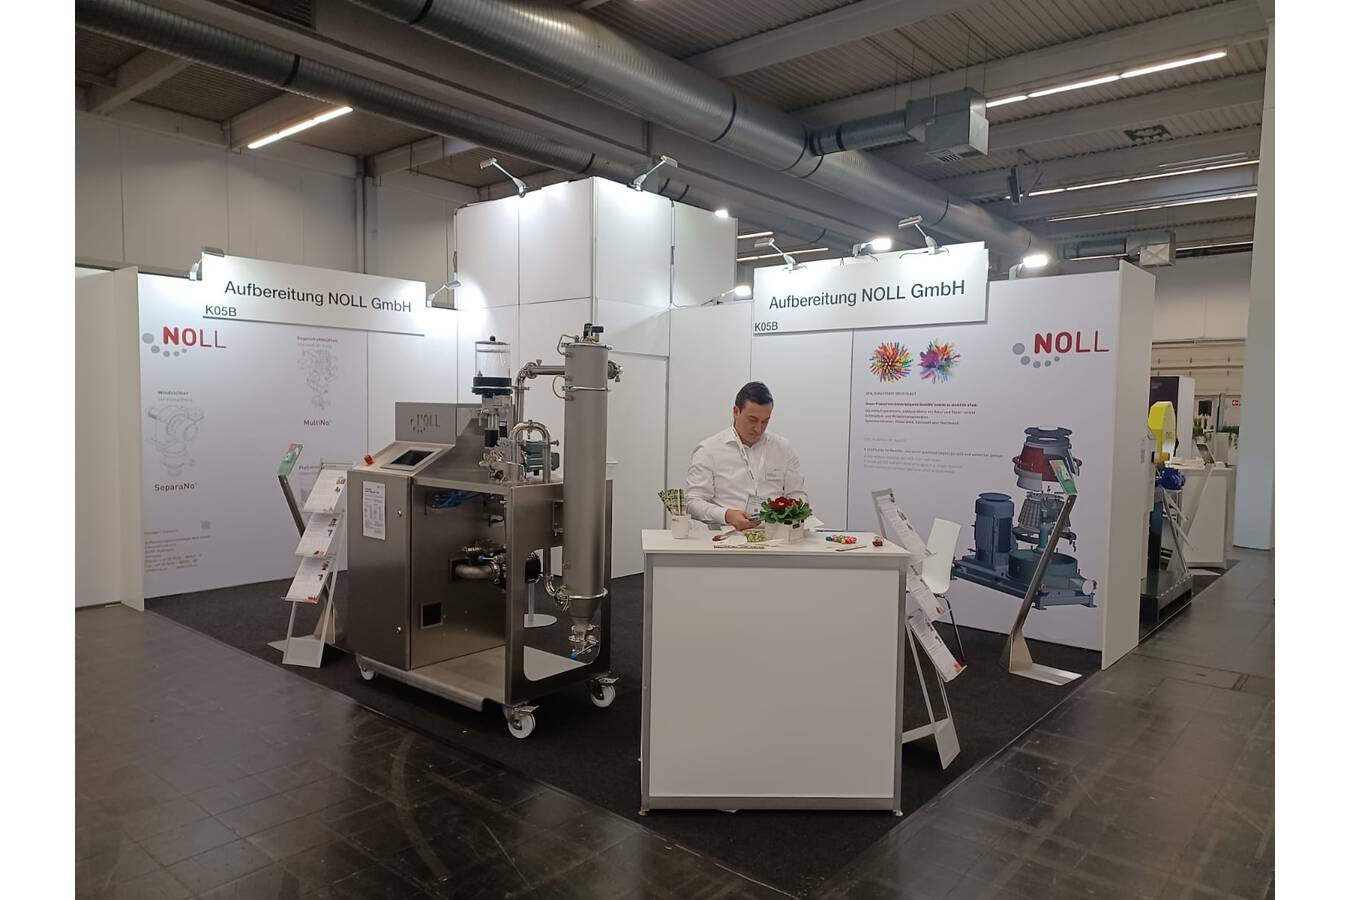 Review NOLL at SOLIDS 2023: Meet the Energy Savers Many visitors, energy efficiency in focus, impact whirl mill DemiNo® in great demand, plus NOLL’s new compact laboratory system 1050.